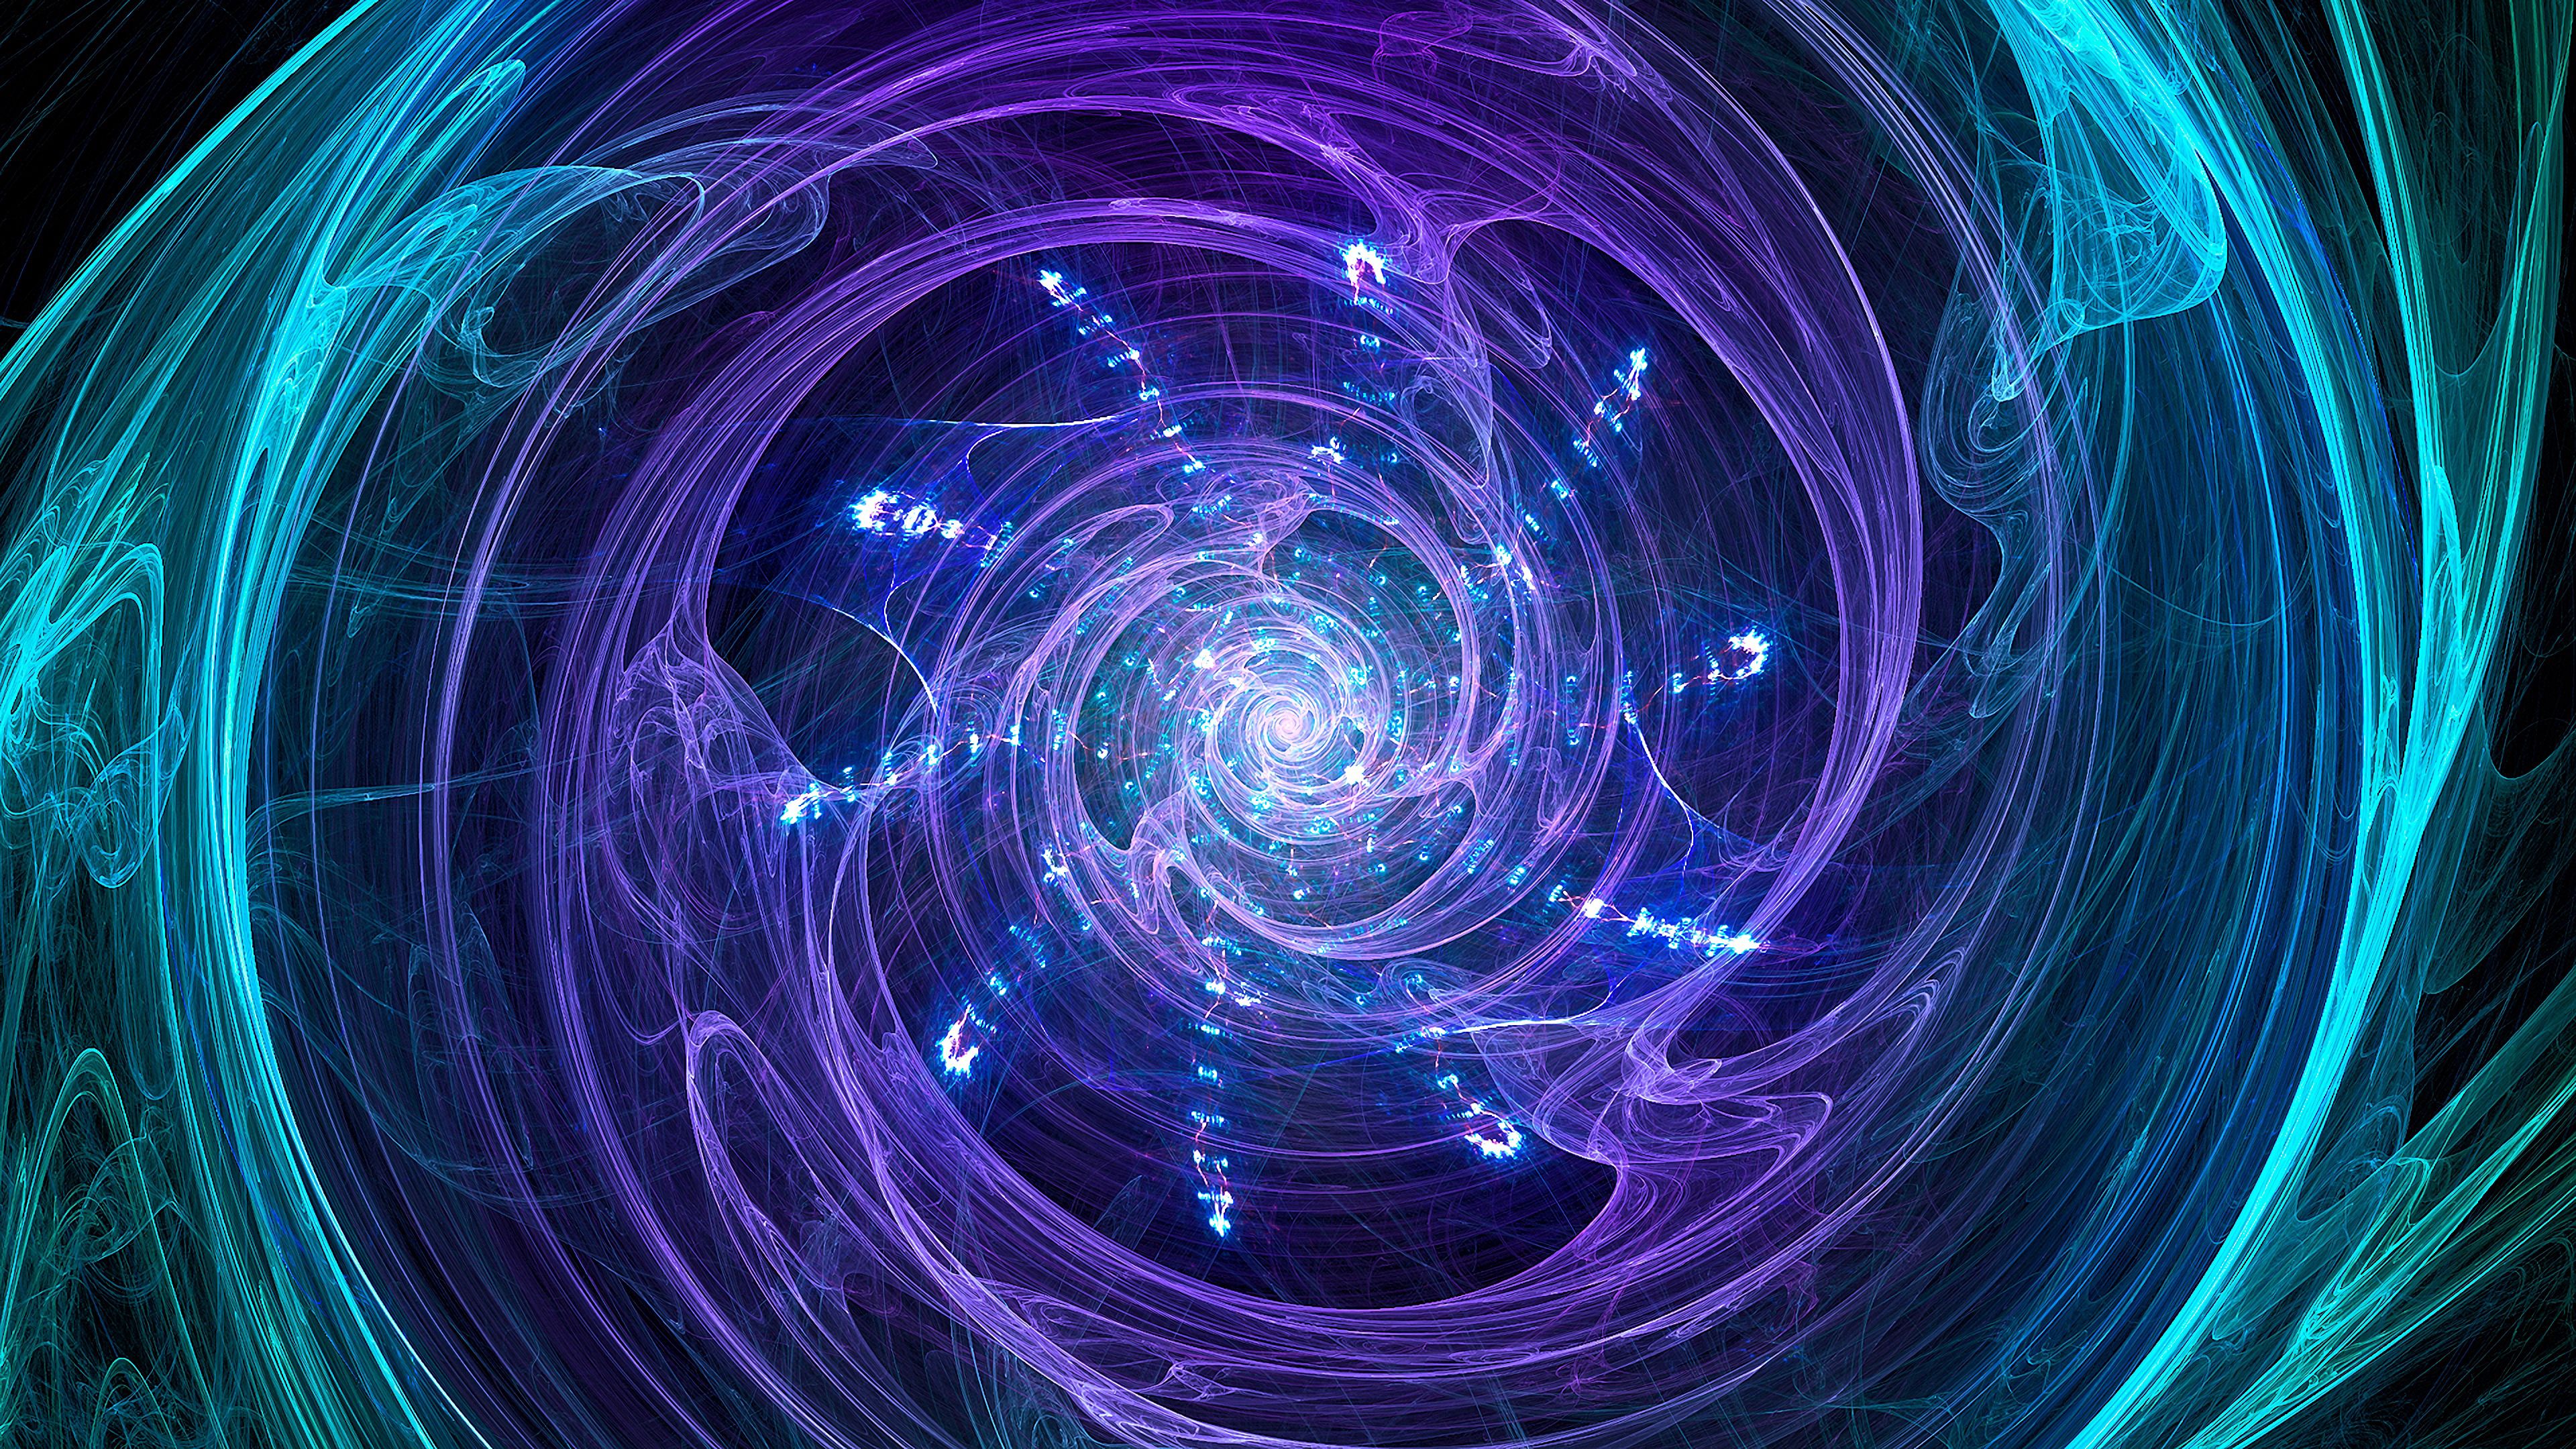 fractal, abstract, glow, bright, swirling, involute